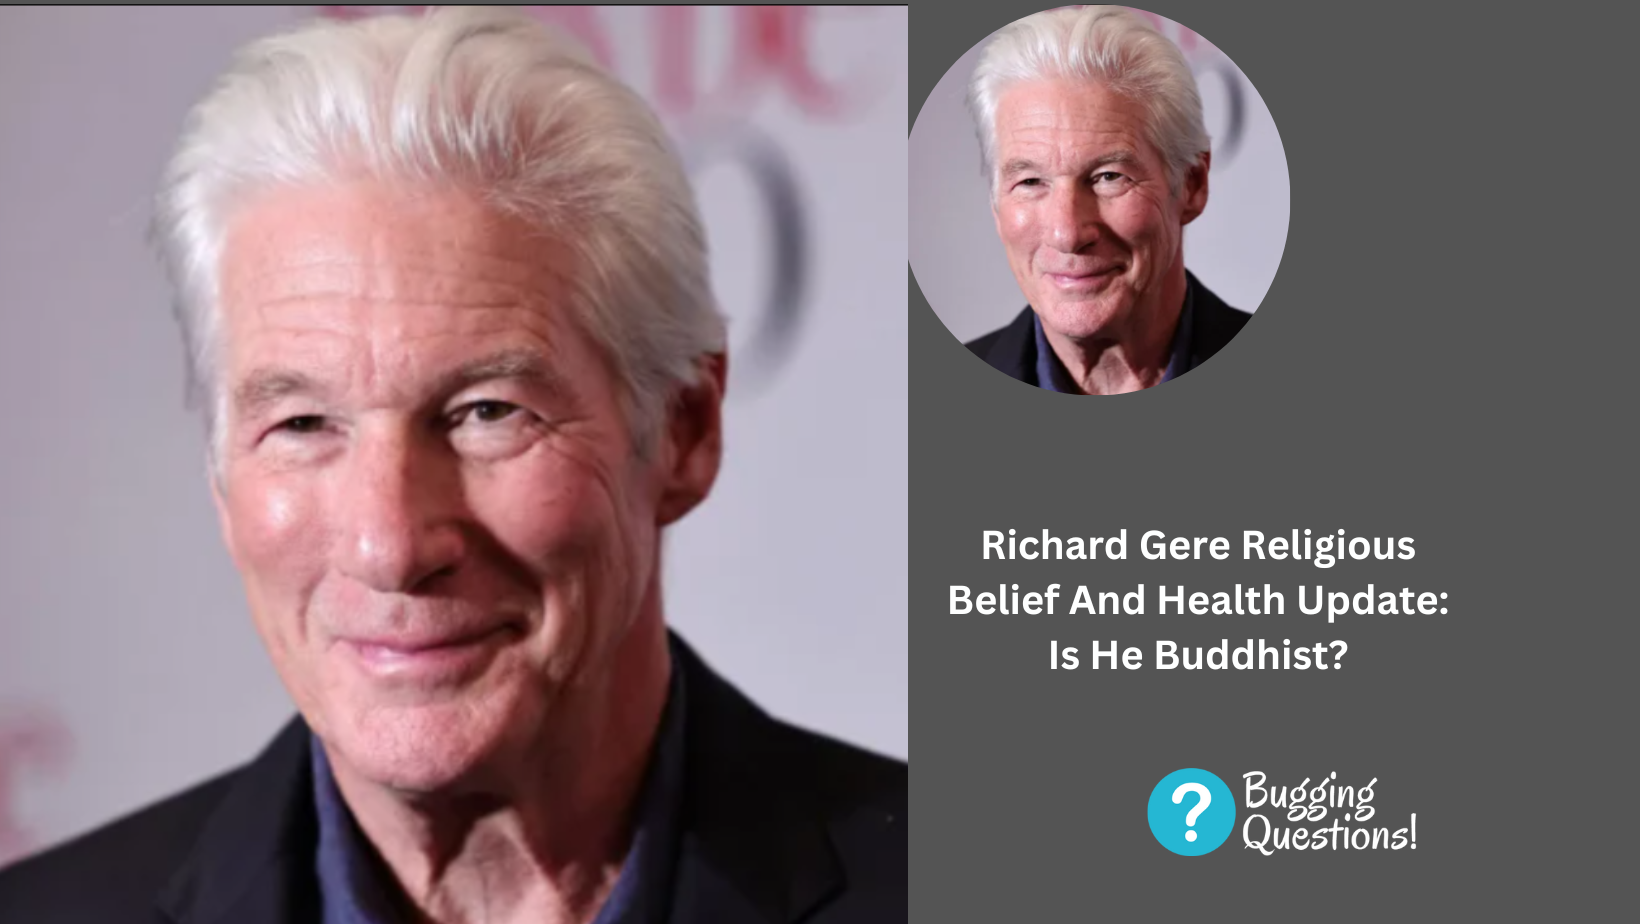 Richard Gere Religious Belief And Health Update: Is He Buddhist?